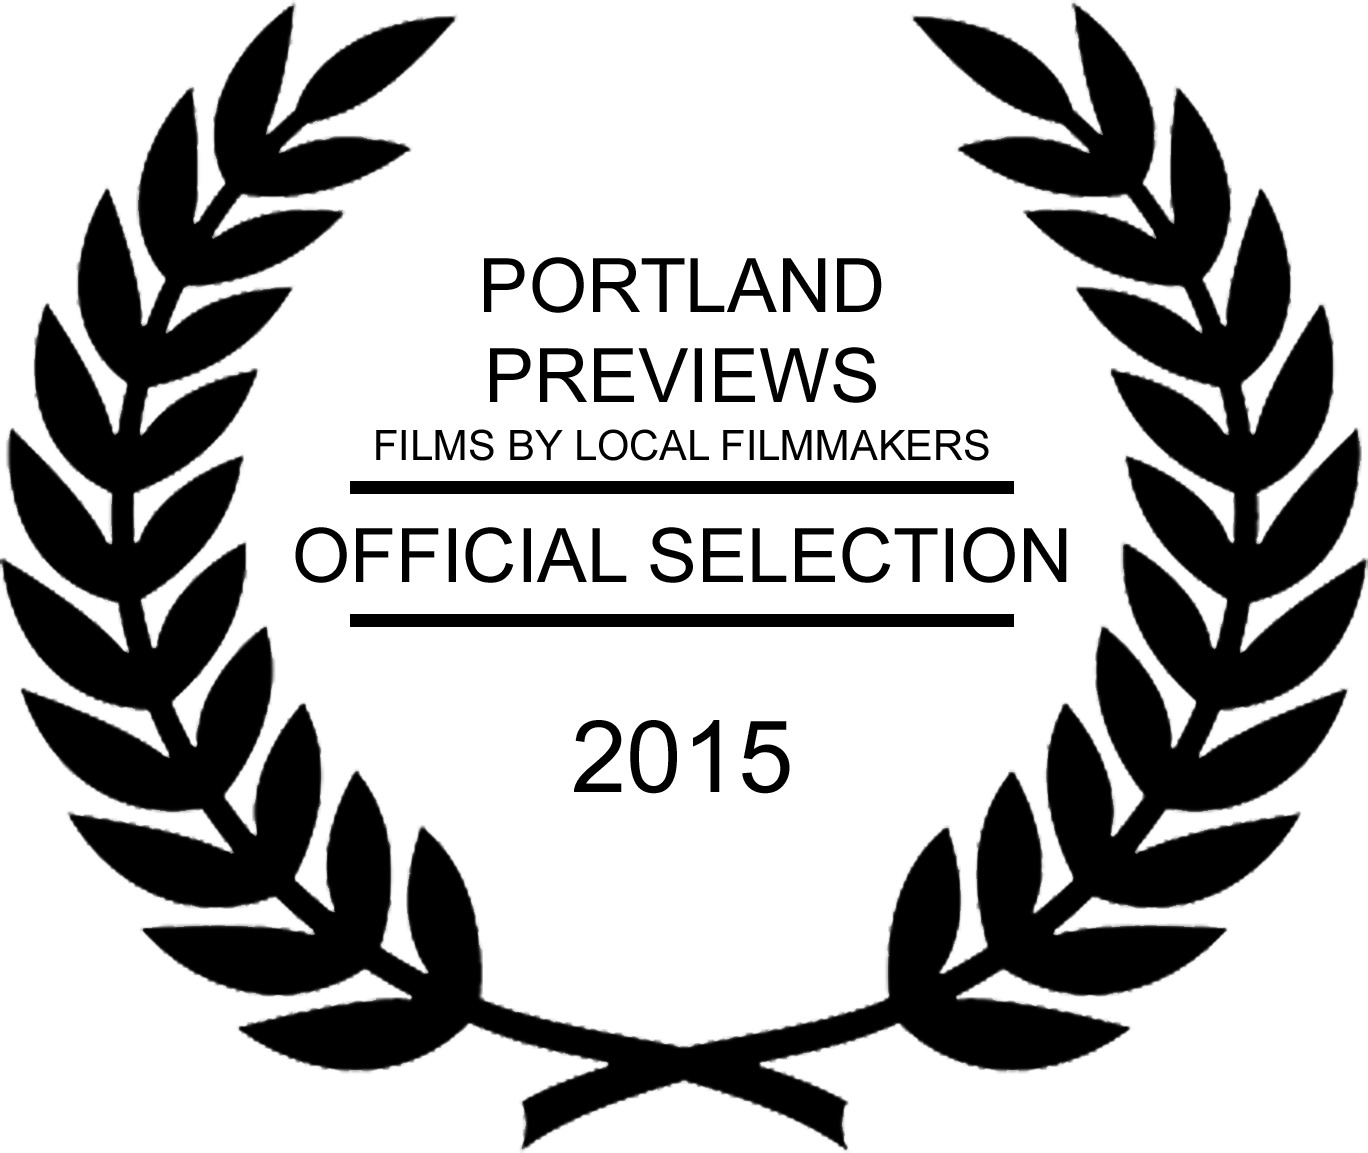 Festival Director for the annual Portland Previews: Films by Local Filmmakers